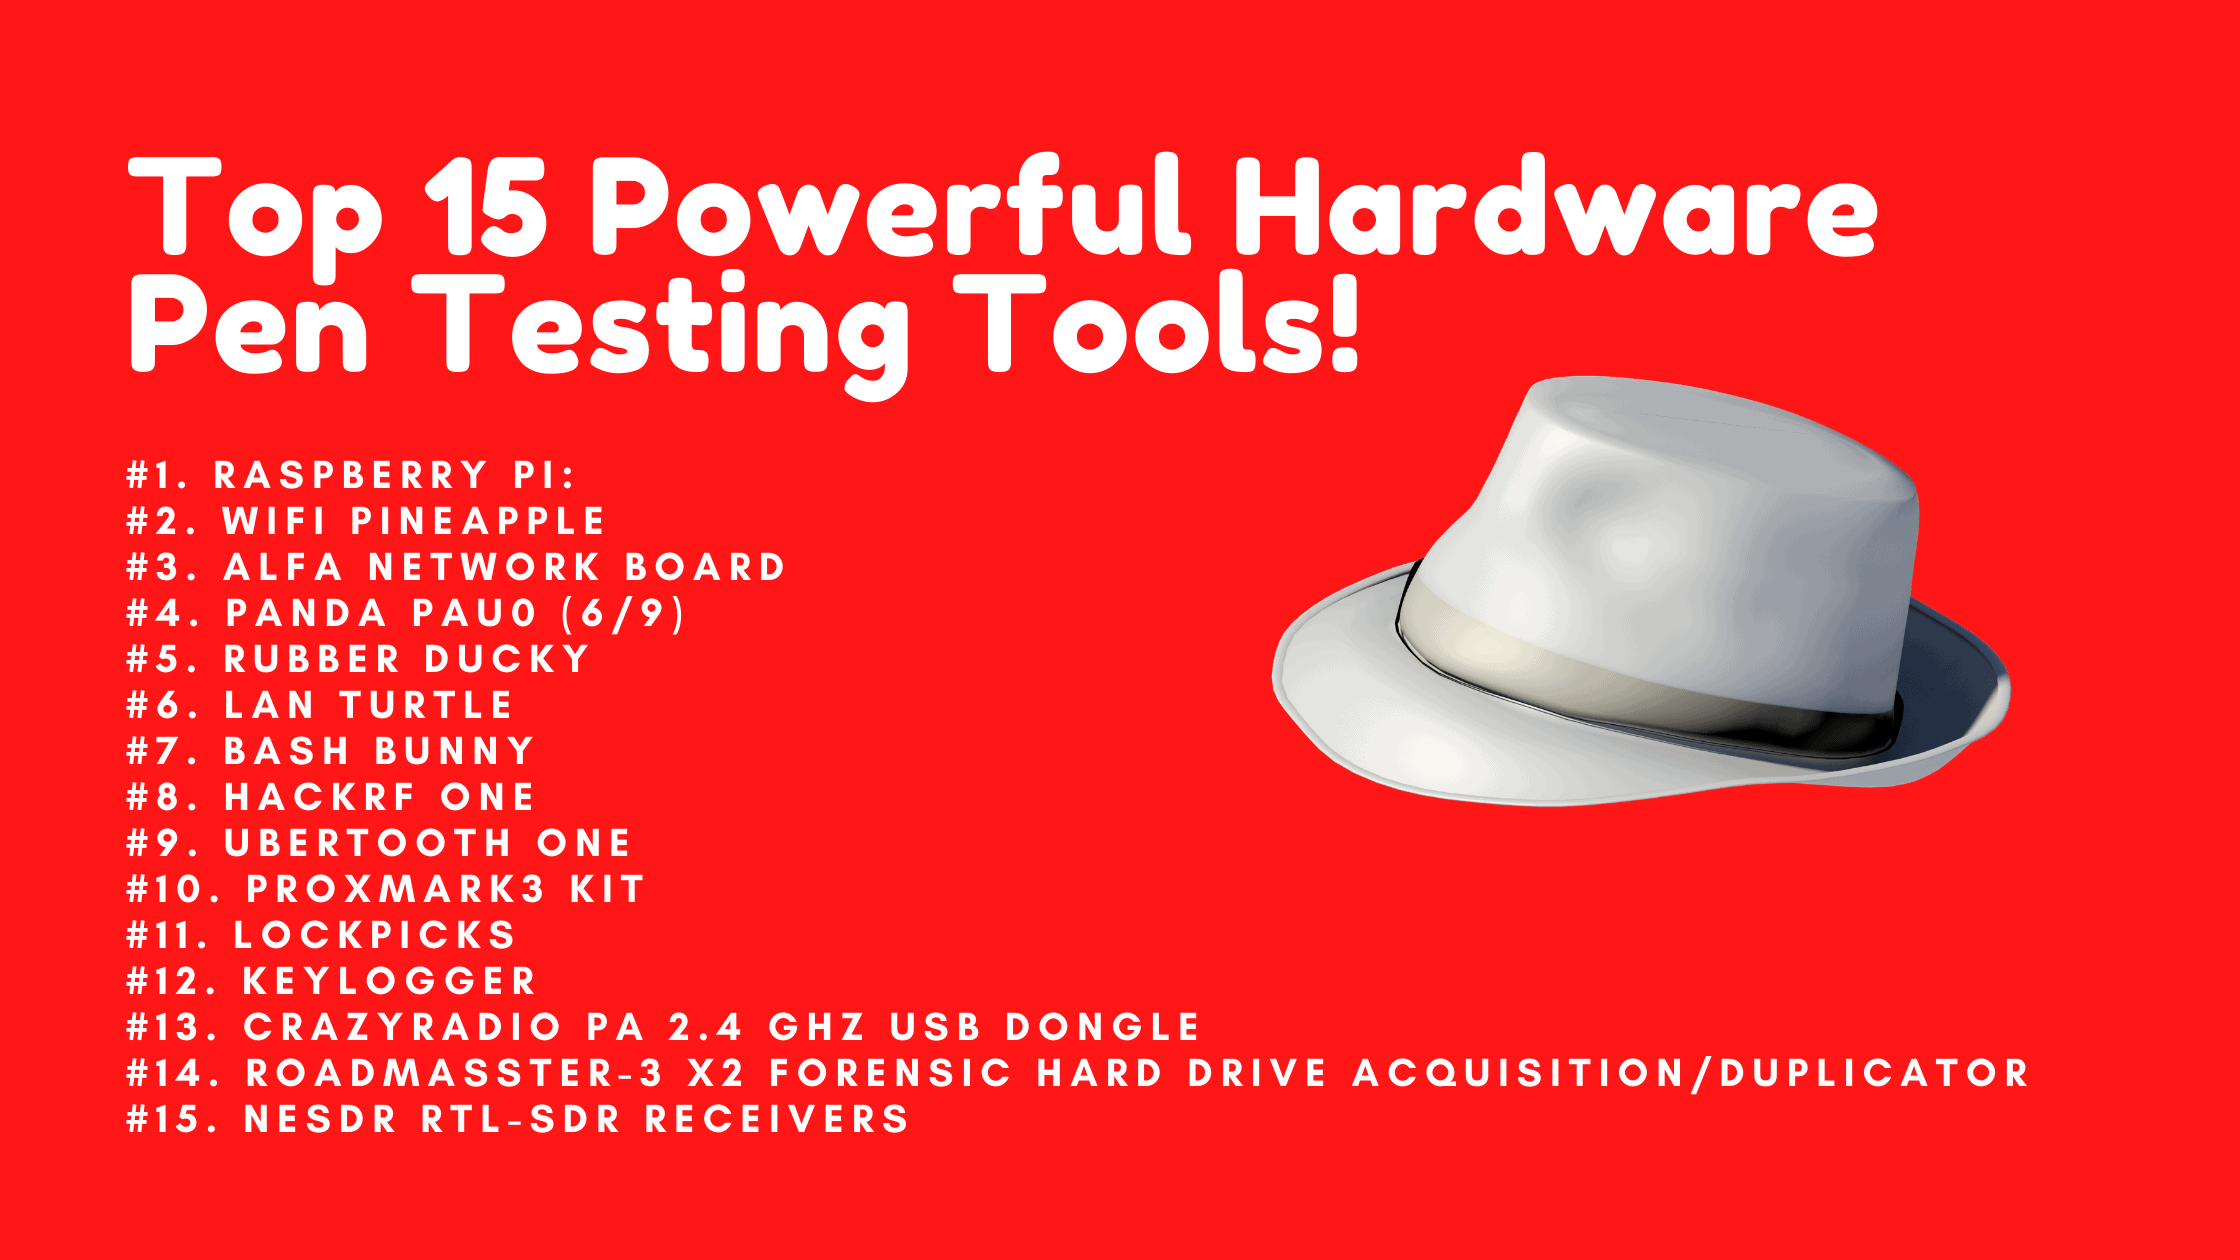 Top 15 Powerful Hardware Pen Testing Tools For Successful Pen Testing